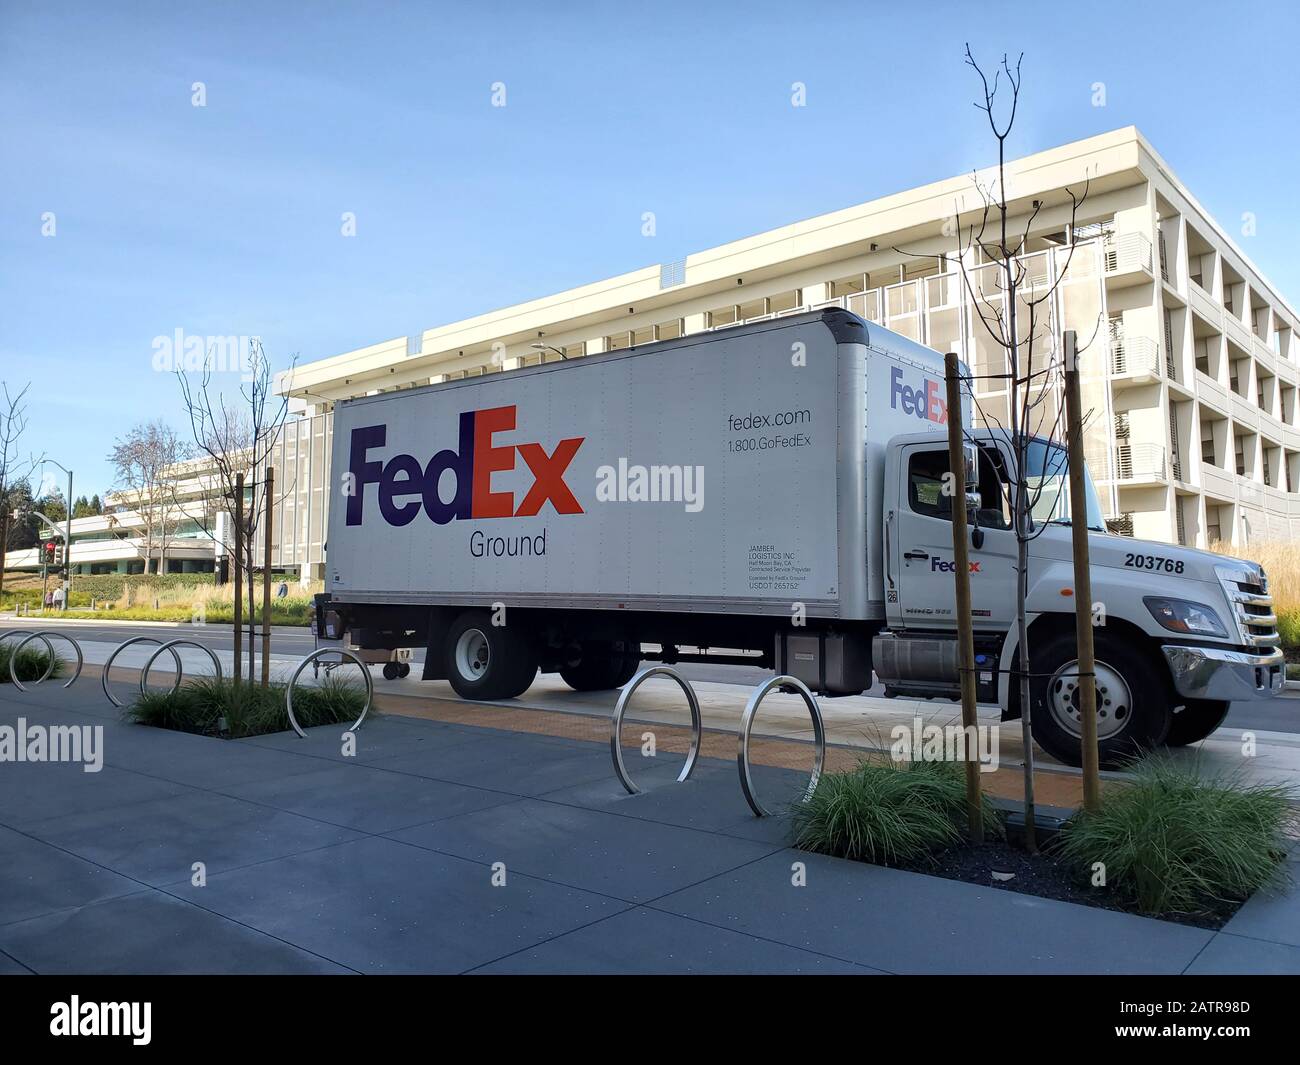 Federal Express (FedEx) Ground truck in loading dock in San Ramon, California, January 31, 2020. () Stock Photo